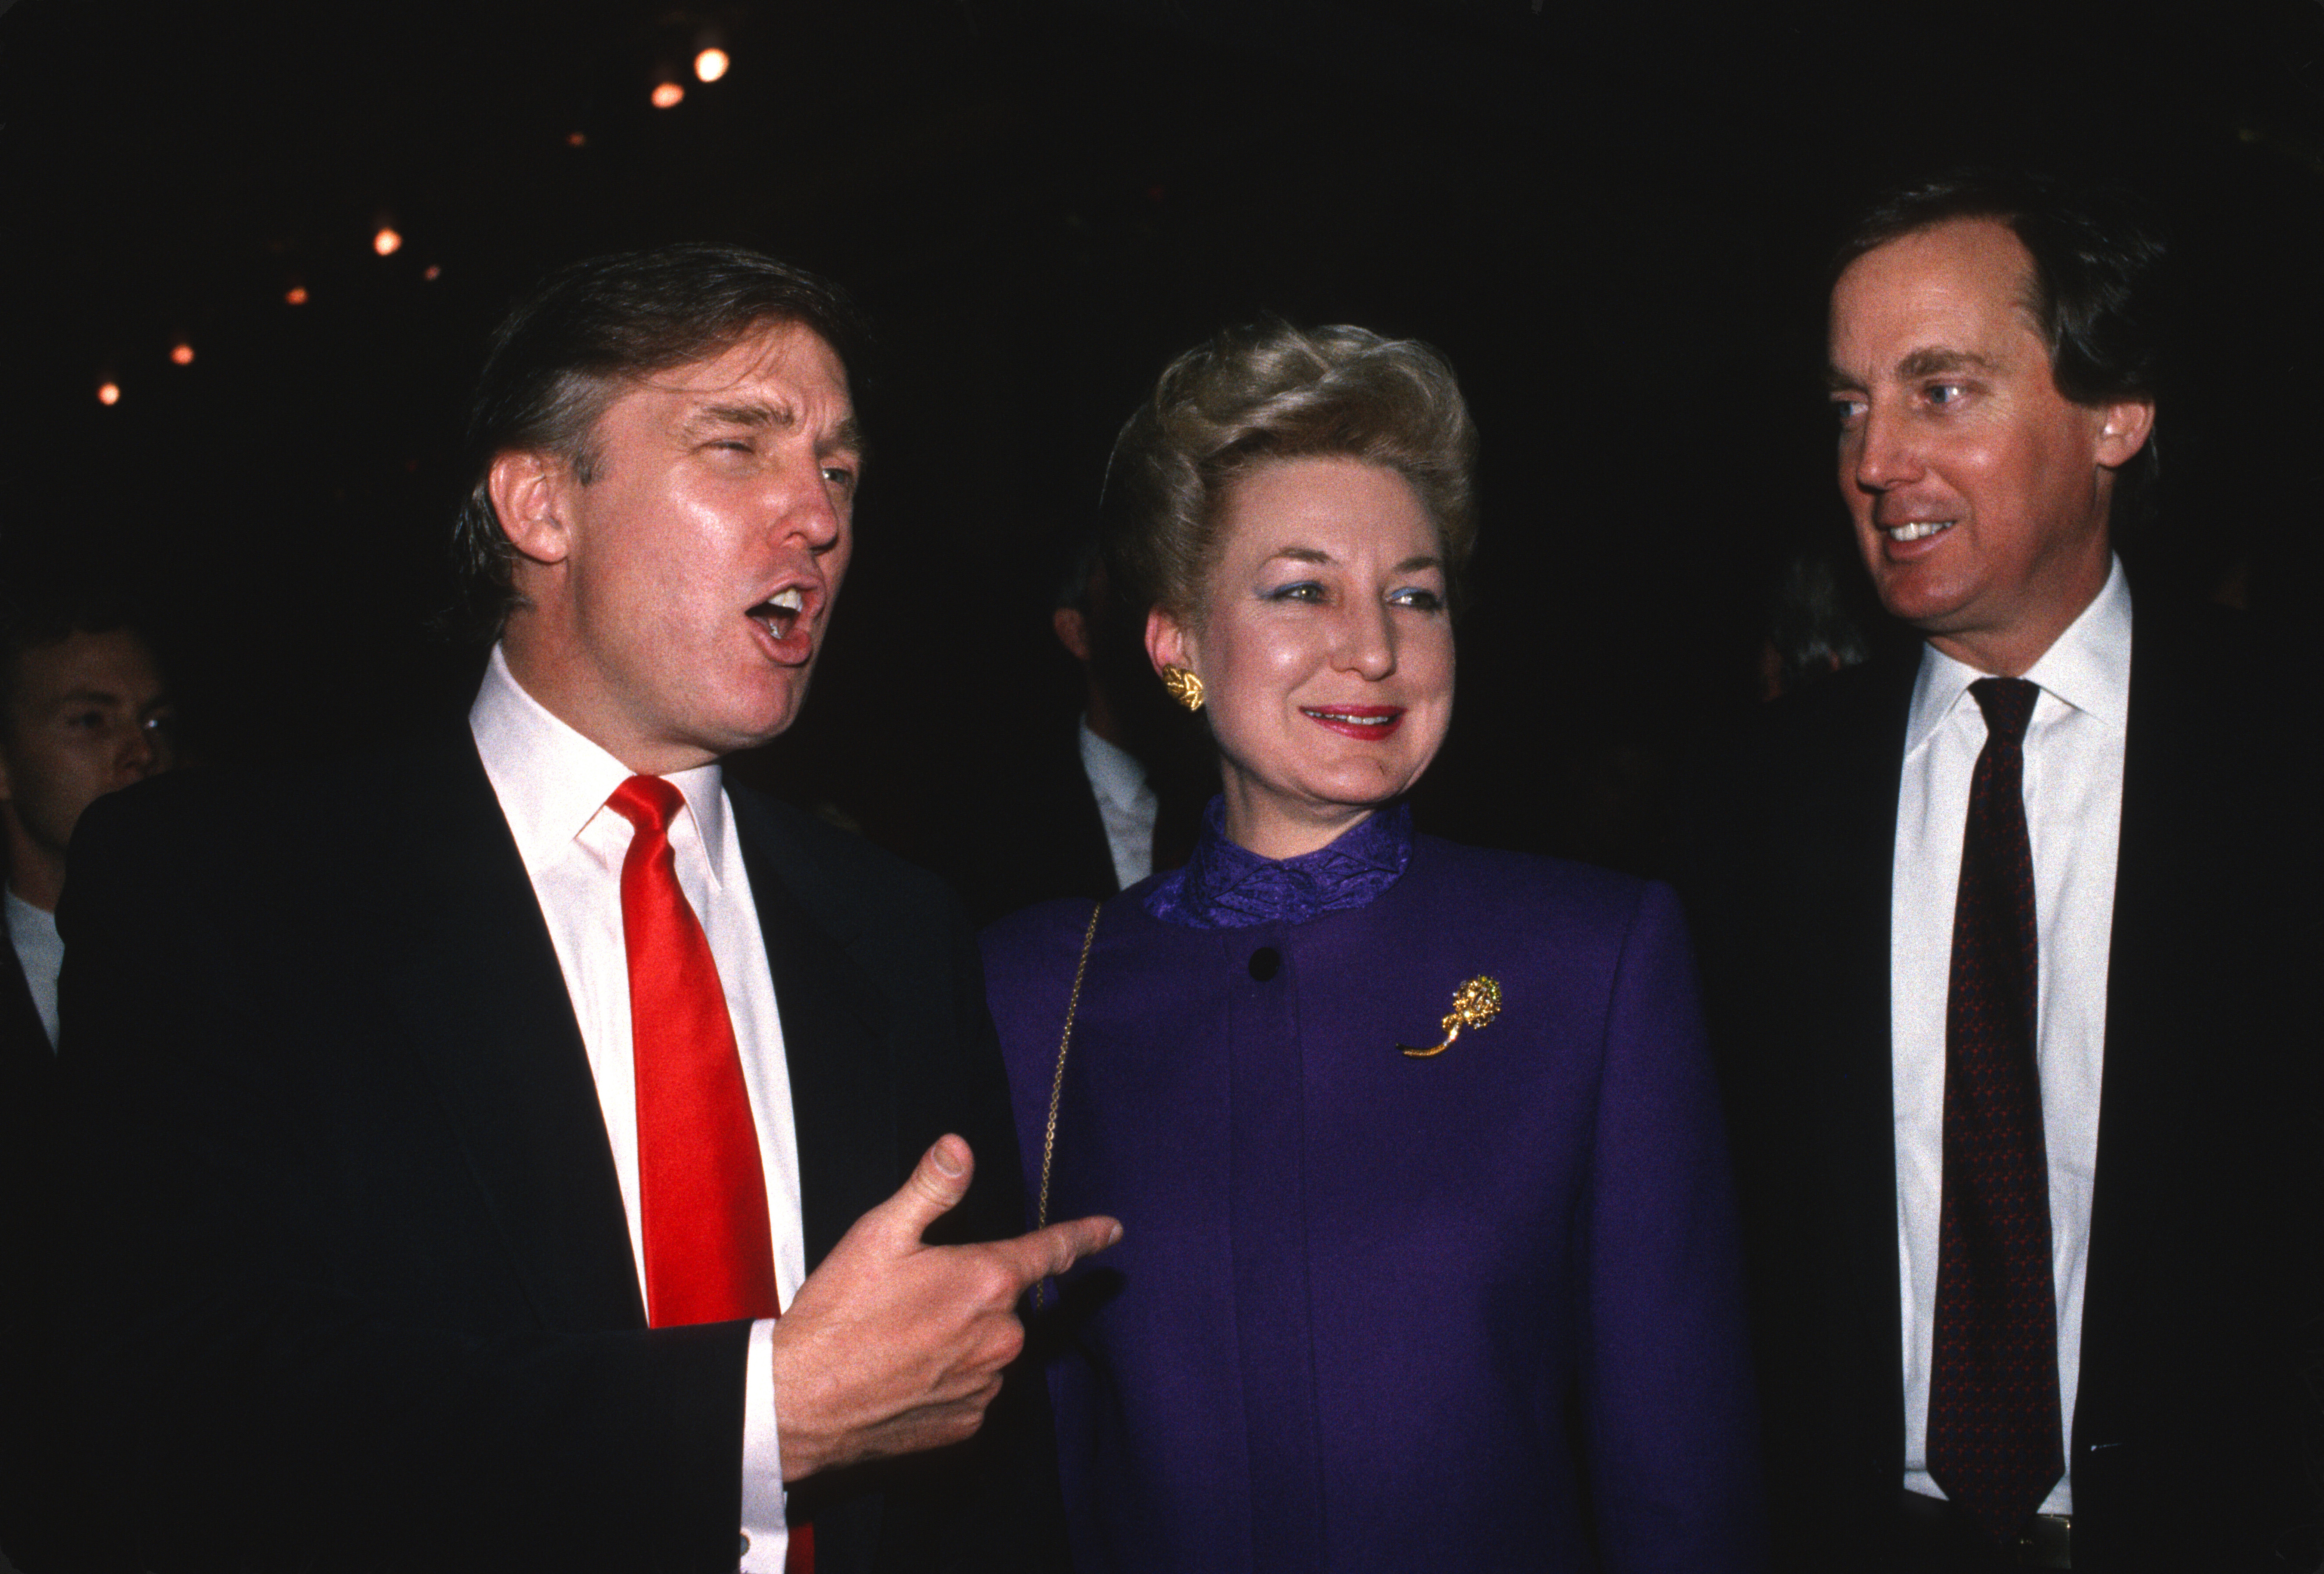 Donald Trump with sister Maryanne Trump Barry and brother Robert Trump attend the Trump Taj Mahal opening April 1990 in Atlantic City, New Jersey | Source: Getty Images